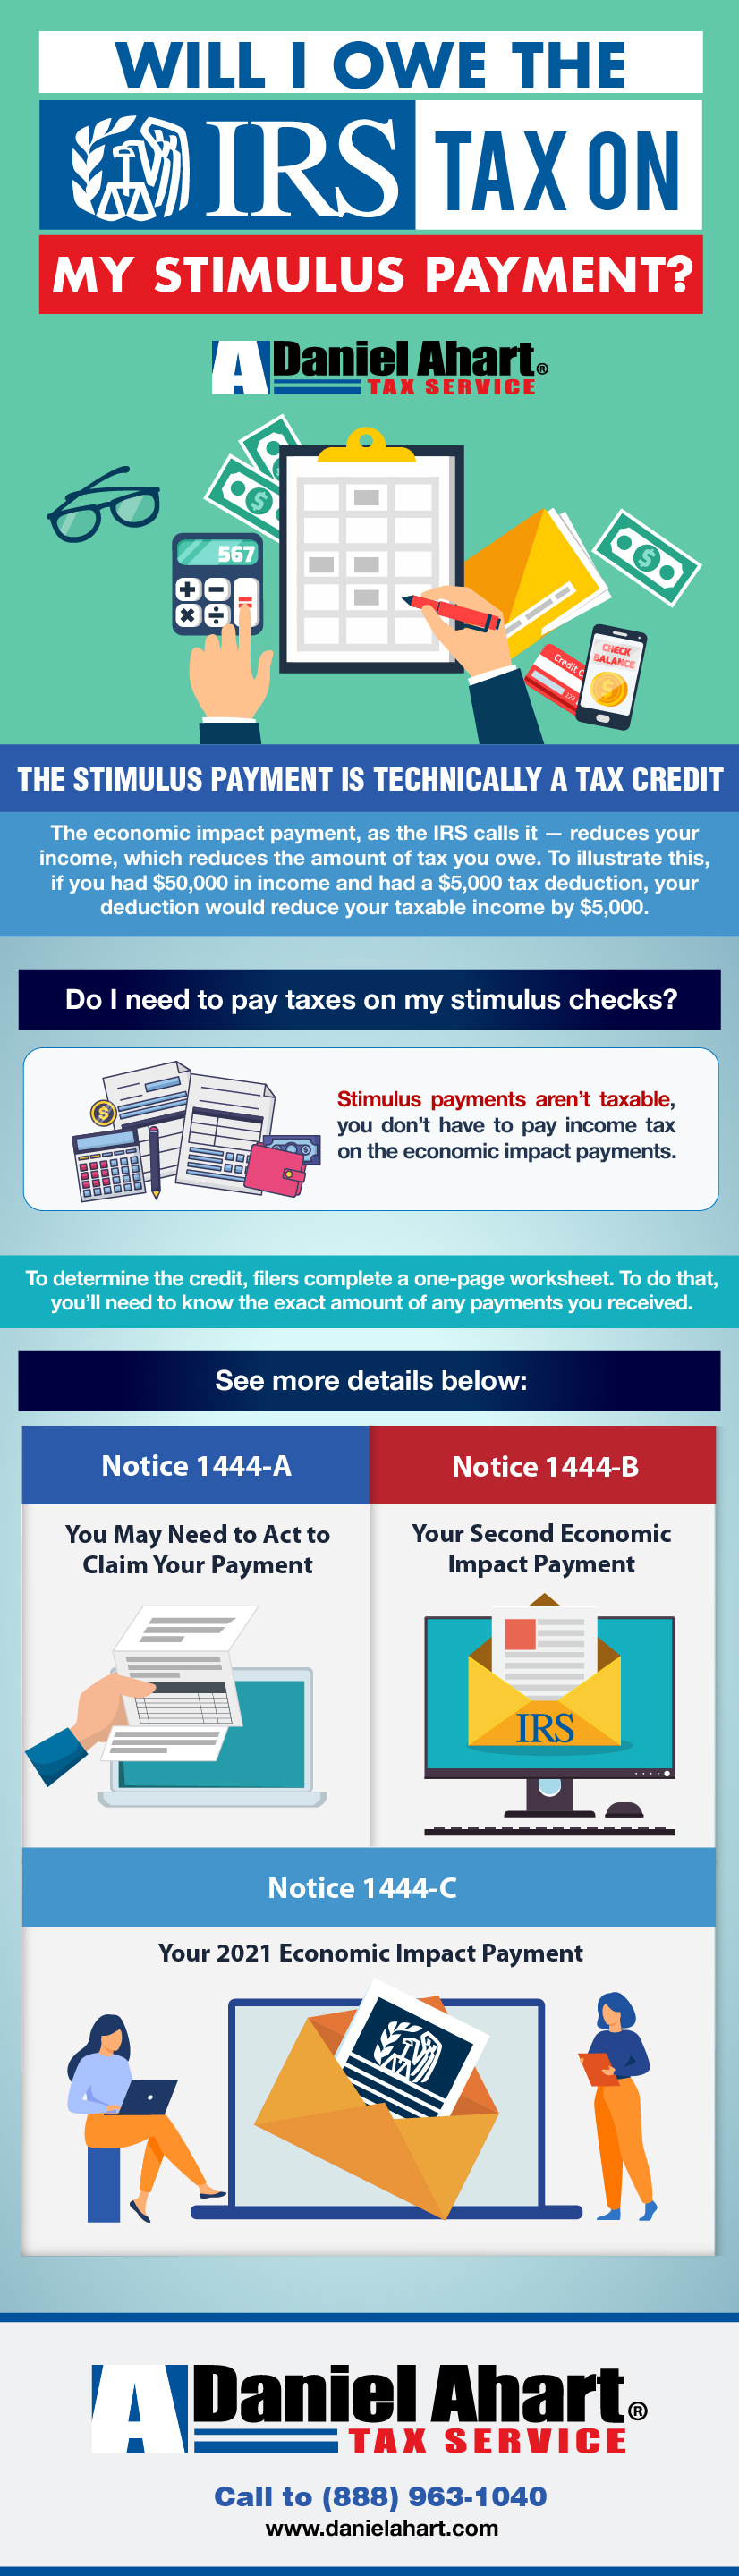 Will I Owe the IRS Tax on My Stimulus Payment?